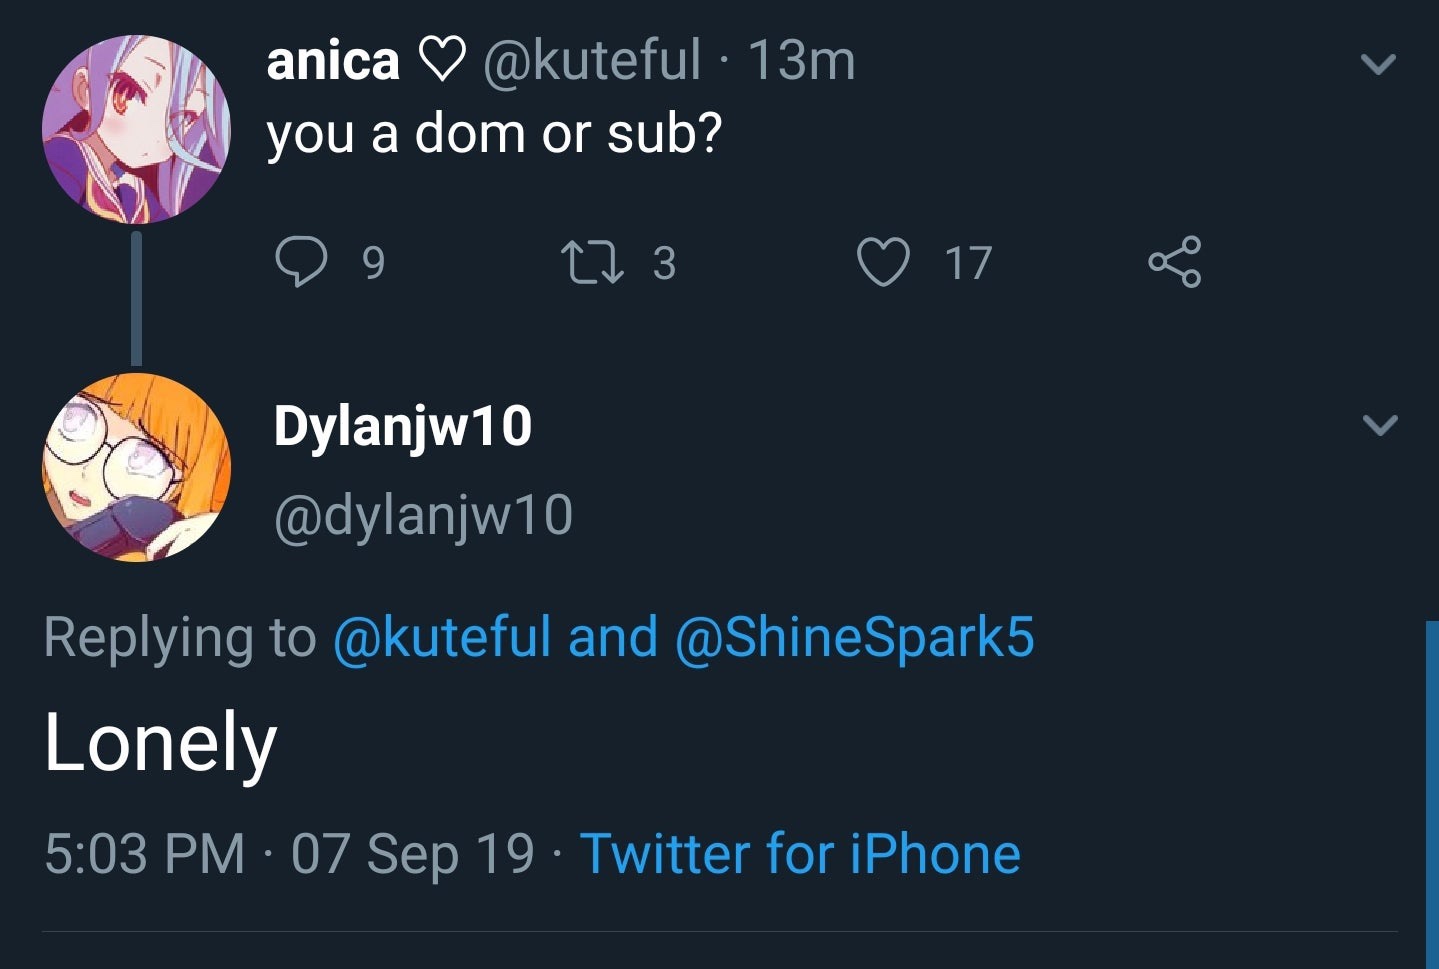 sky - anica 13m you a dom or sub? 9 9 22 3 17 Dylanjw10 and Spark5 Lonely 07 Sep 19 Twitter for iPhone